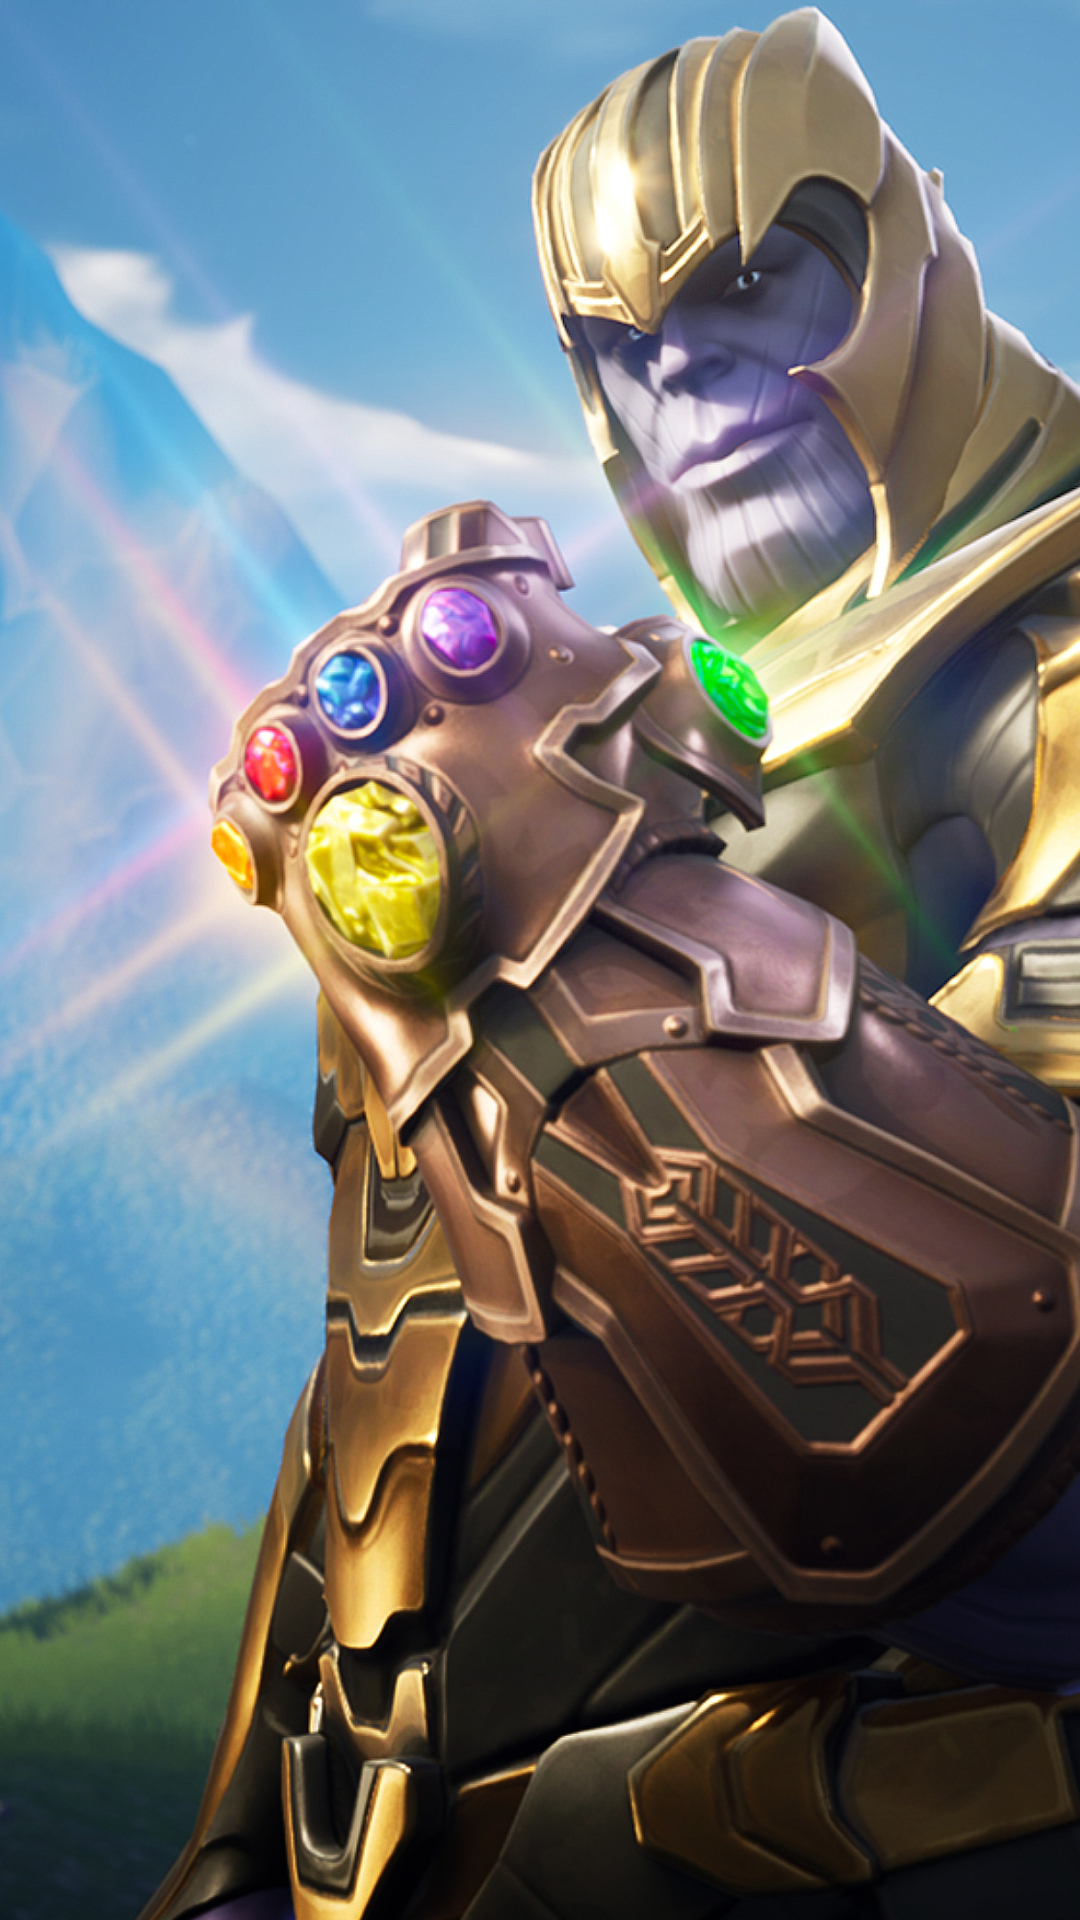 Download Thanos In Fortnite Battle Royale 1280x2120 Resolution, HD 4K